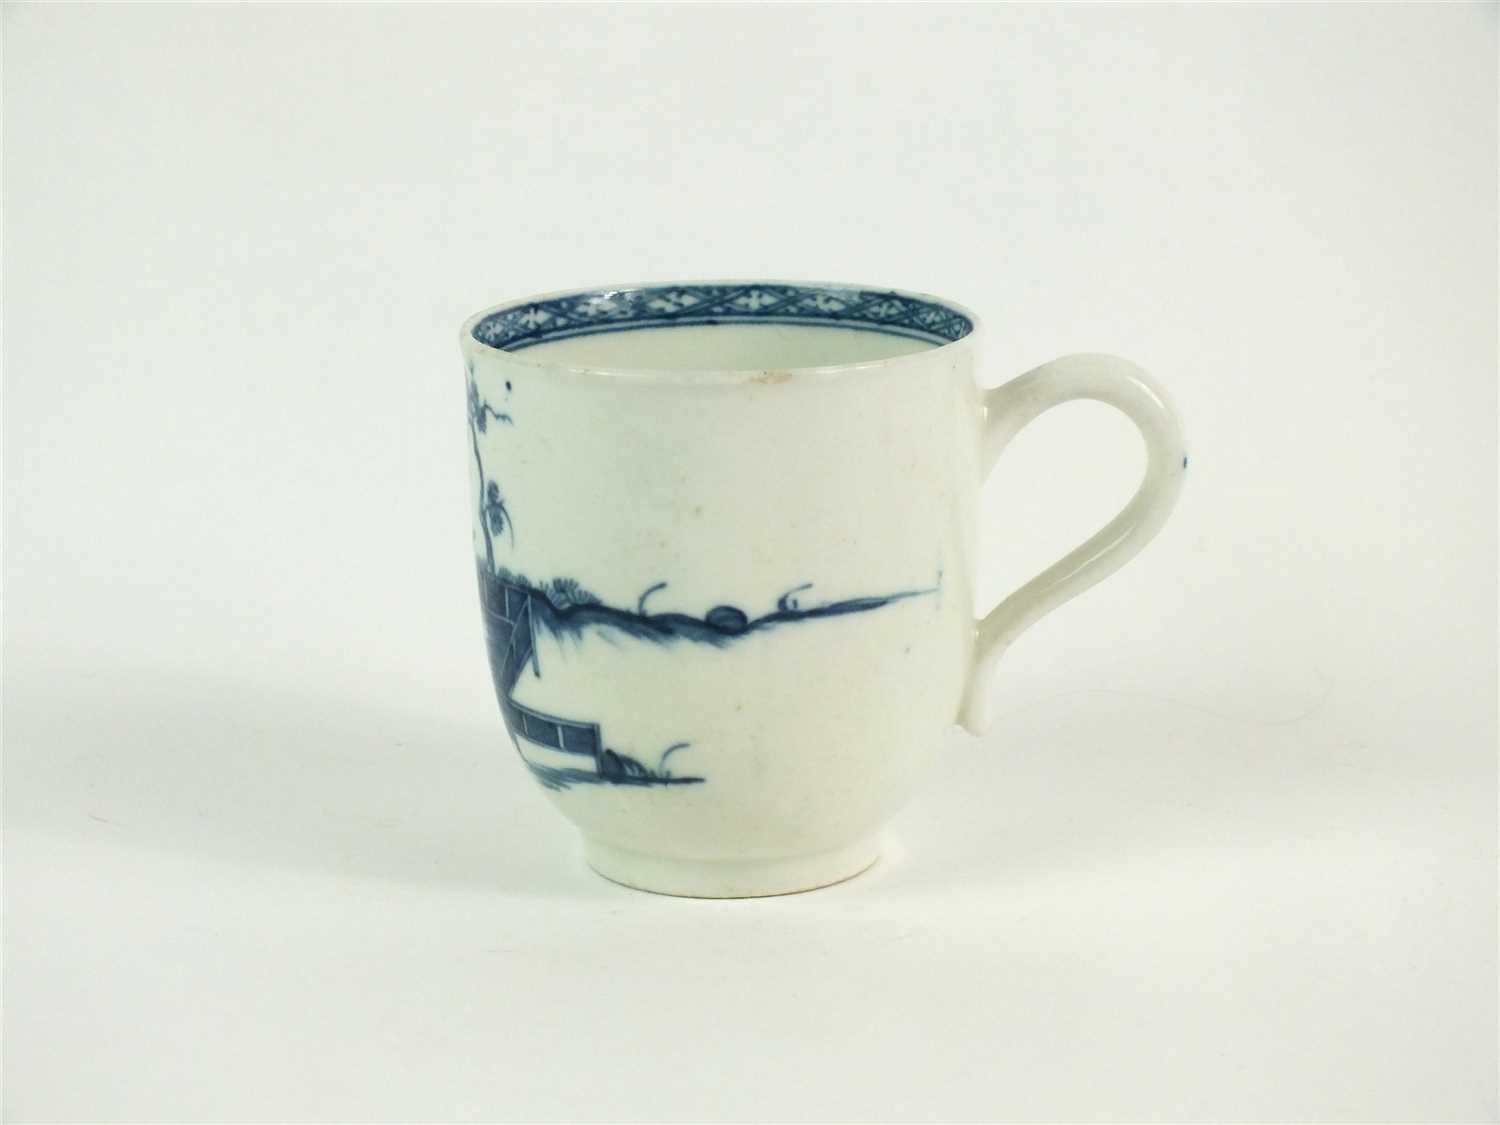 A rare Worcester porcelain blue and white chocolate cup